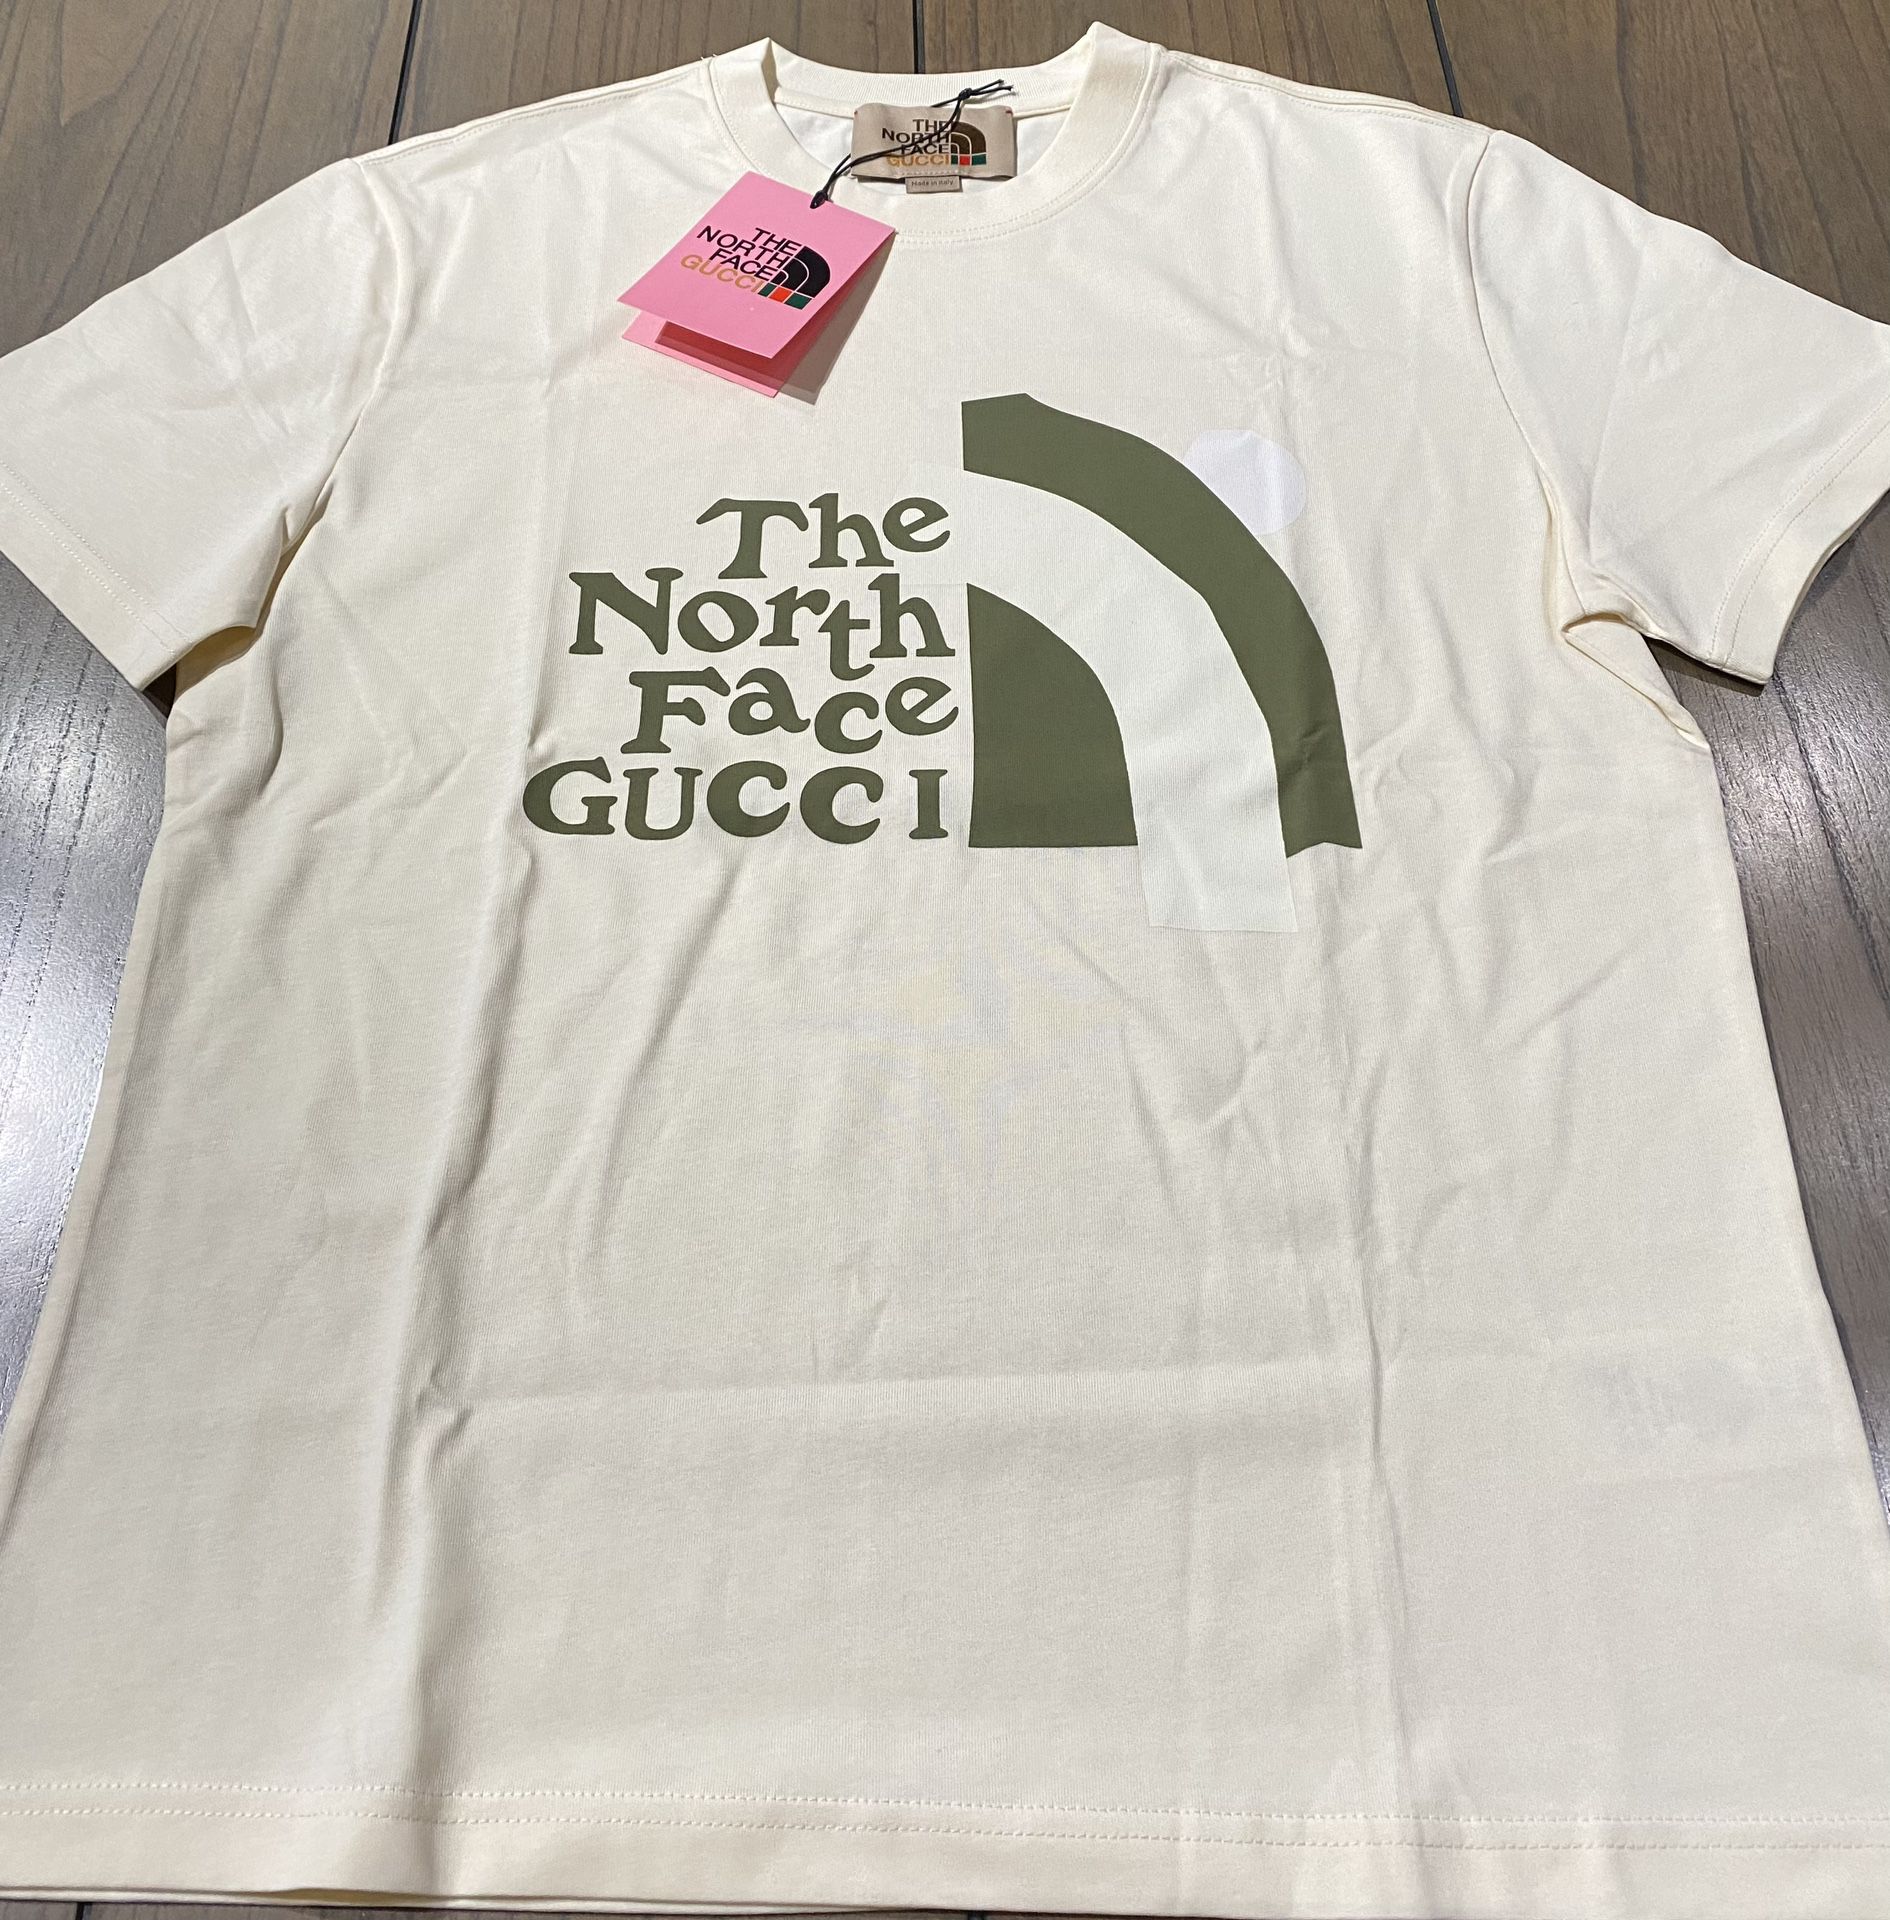 DESIGNER T-SHIRT GUCCI X THE NORTH FACE, Read For Details… VISIT OUR PROFILE FOR MORE ITEMS AVAILABLE!!! for Sale in Oakland Park, FL - OfferUp